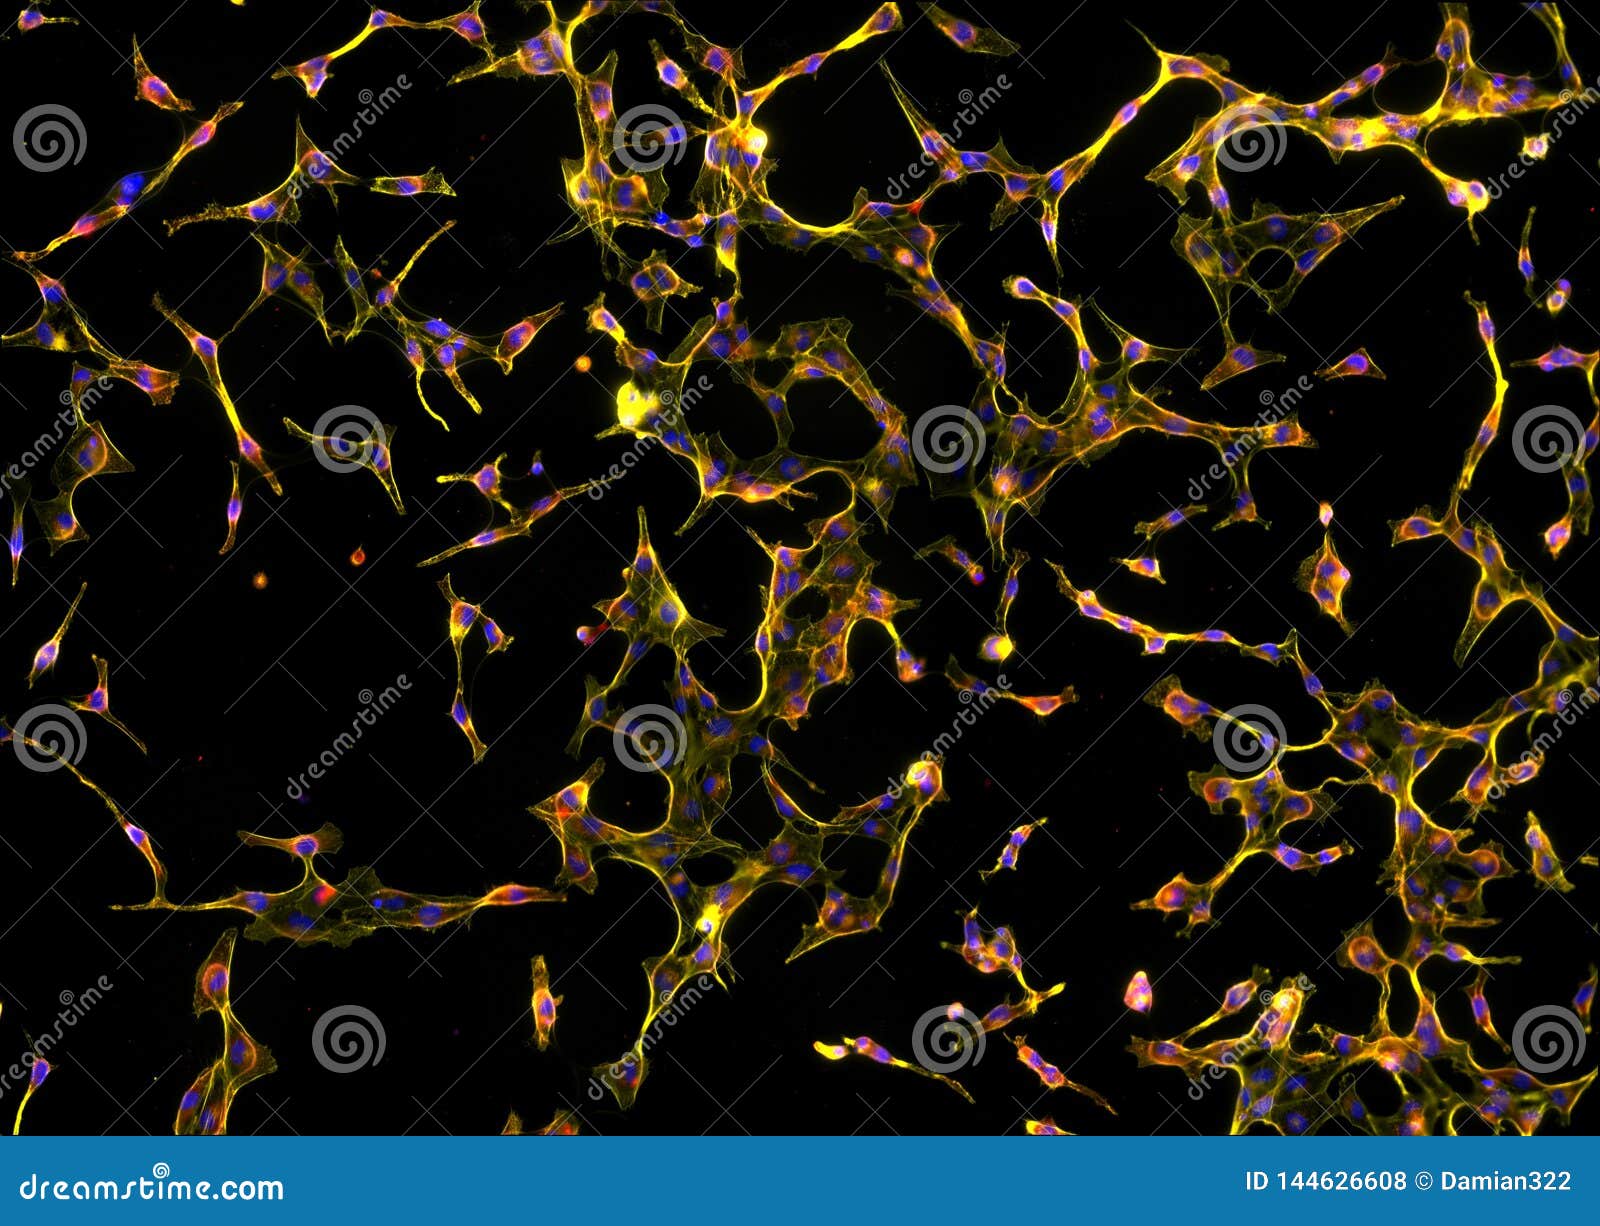 real fluorescence microscopic view of human fibroblasts